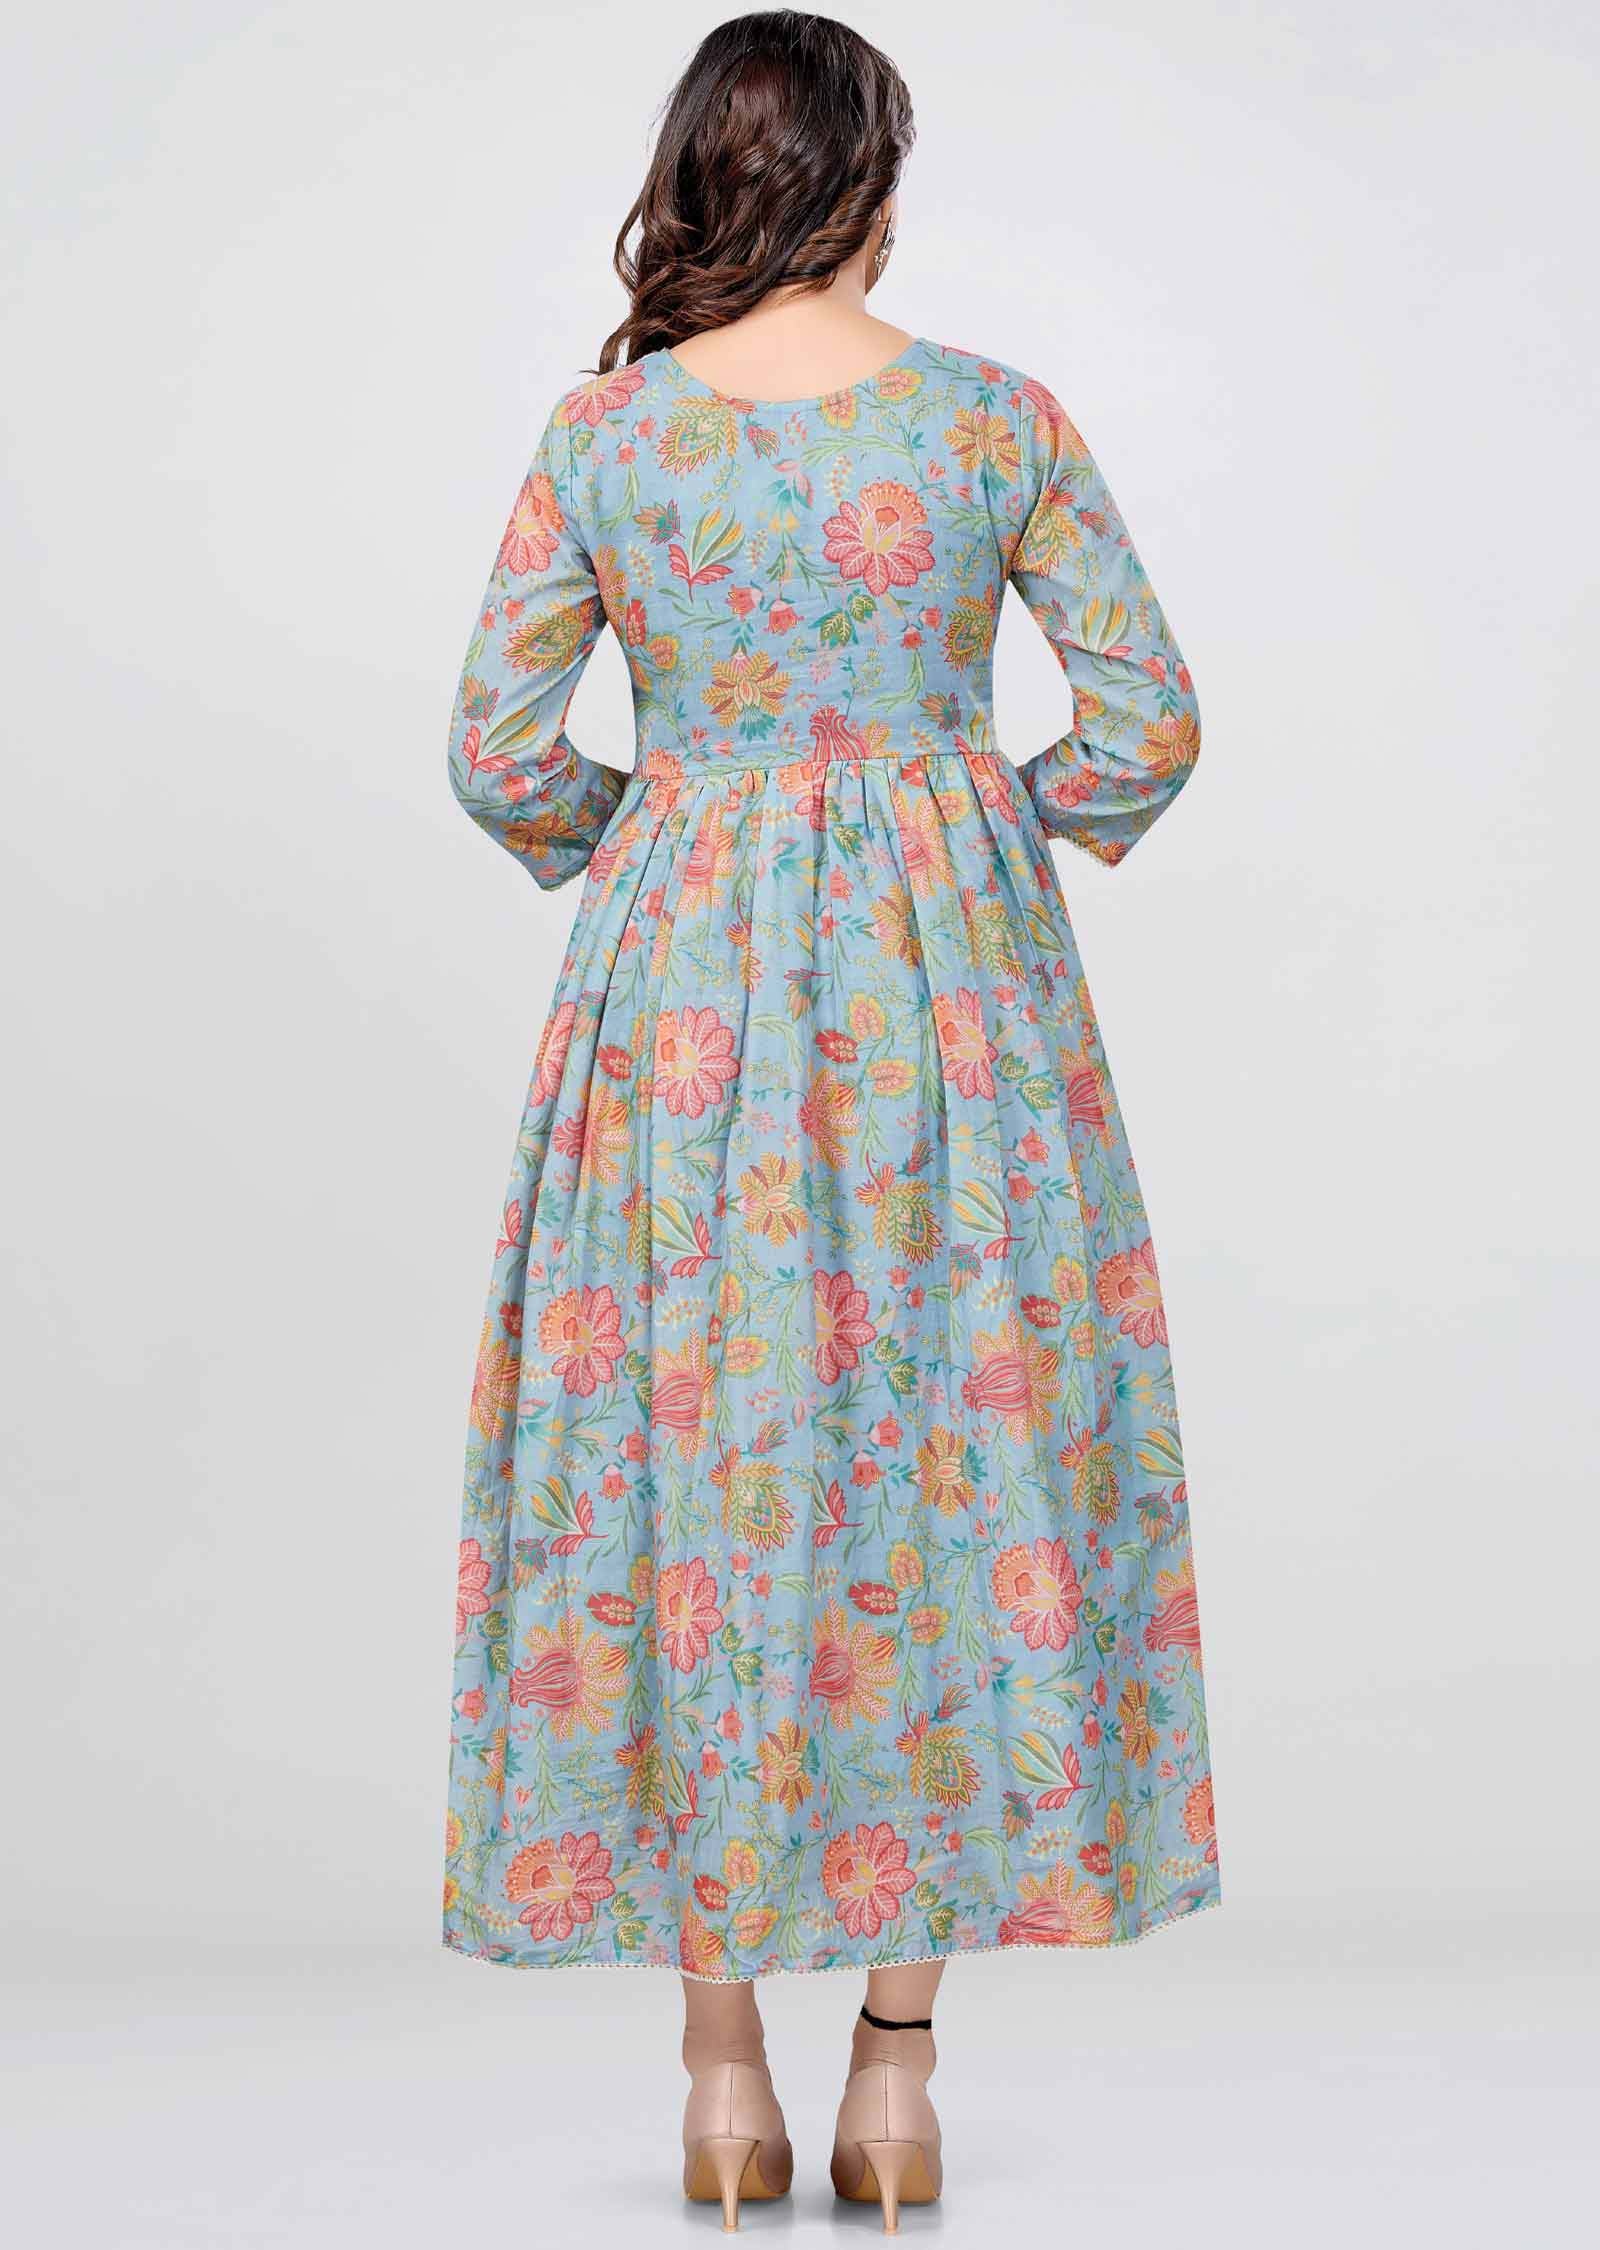 Light Blue Cotton Floral Printed Frock Style Kurti